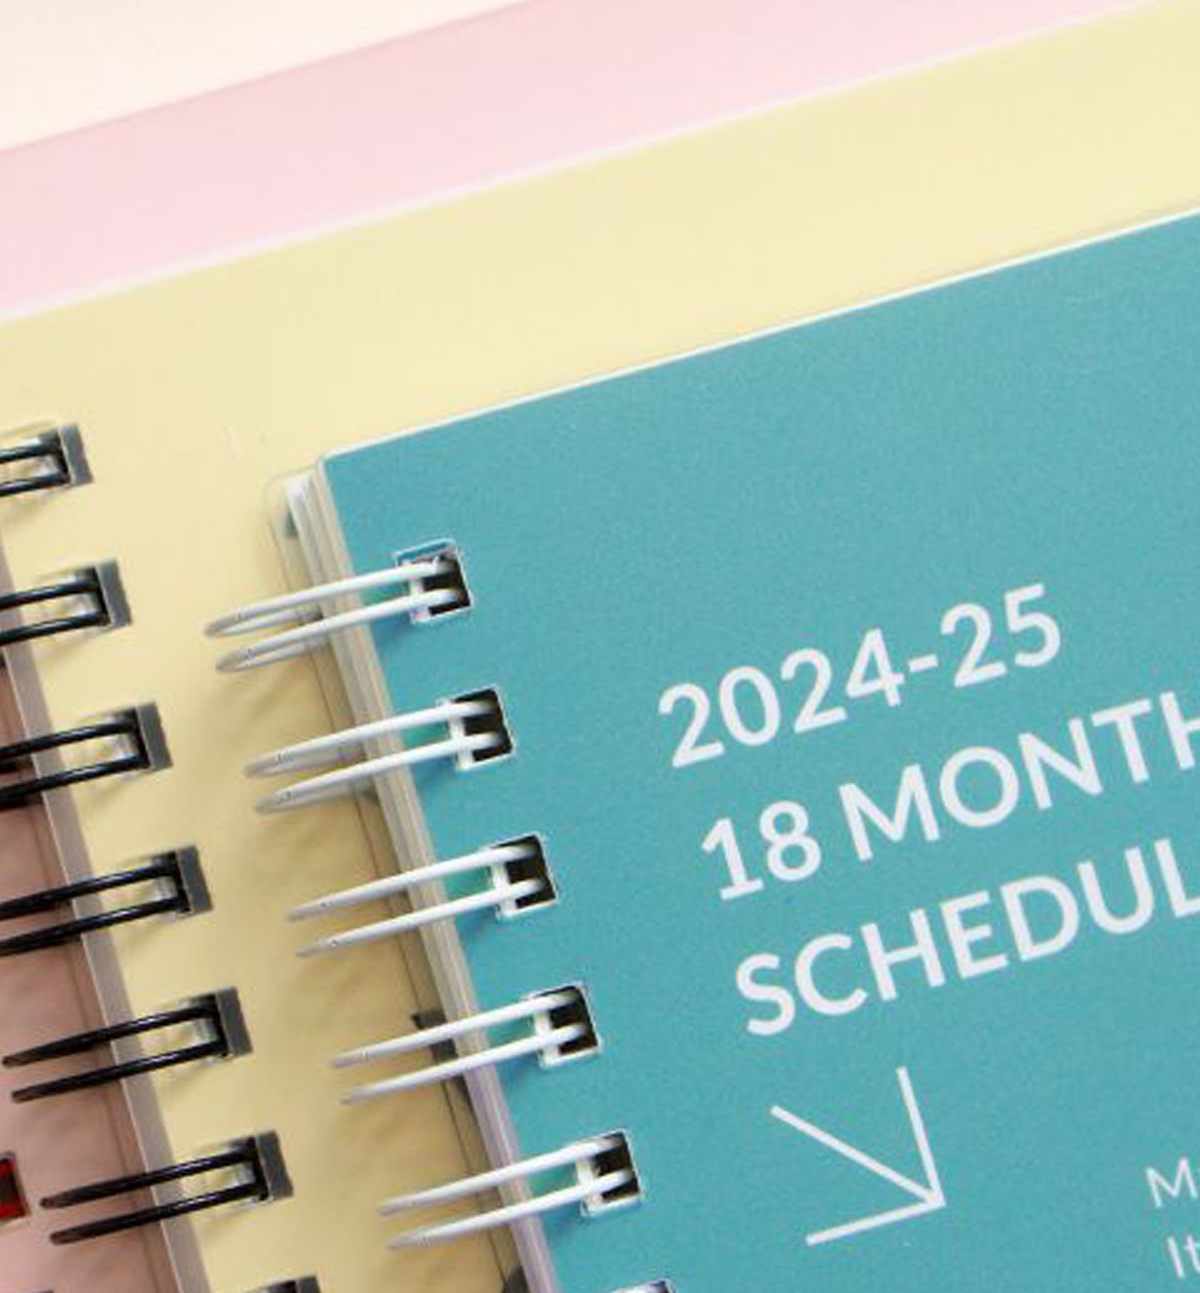 2024-2025 Weekly Planner [18 Months]